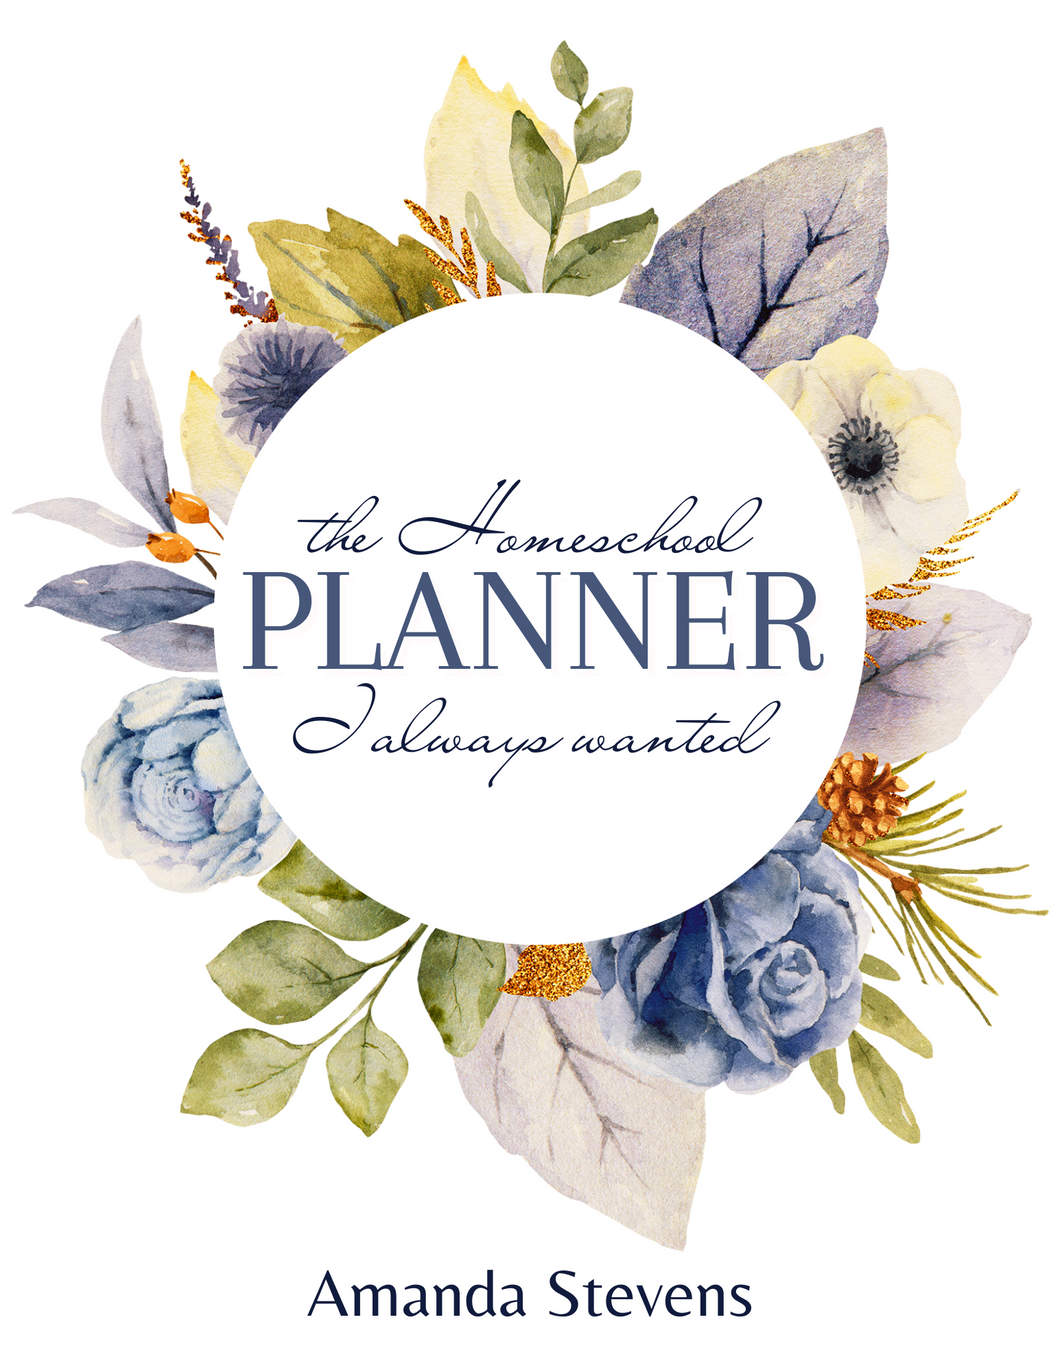 The Homeschool Planner I Always Wanted